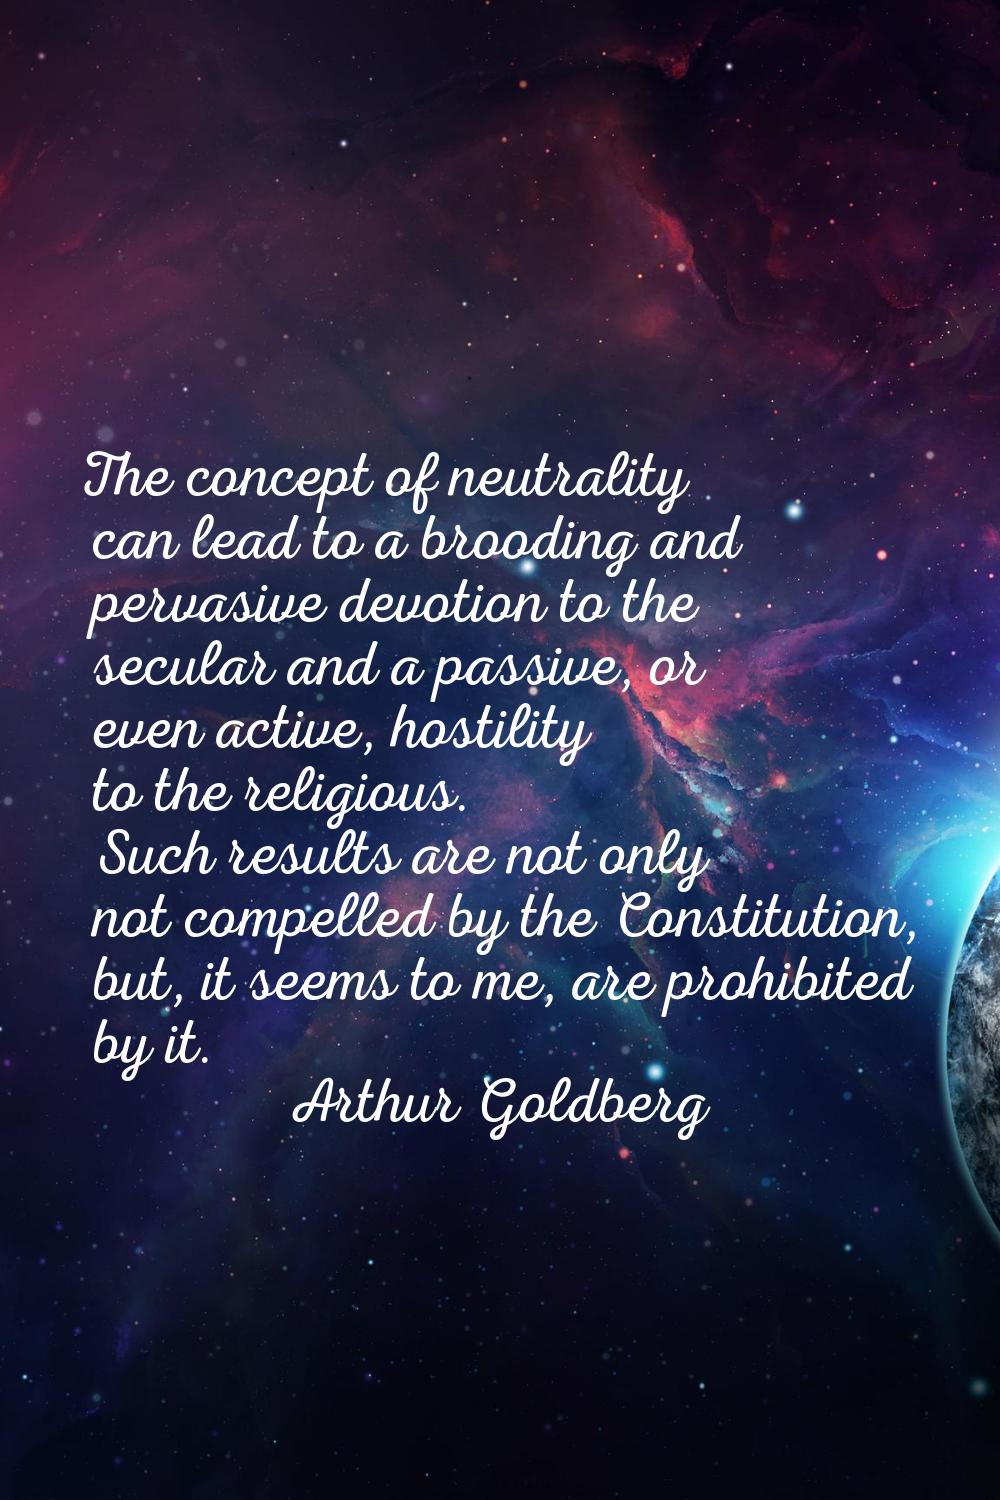 The concept of neutrality can lead to a brooding and pervasive devotion to the secular and a passiv